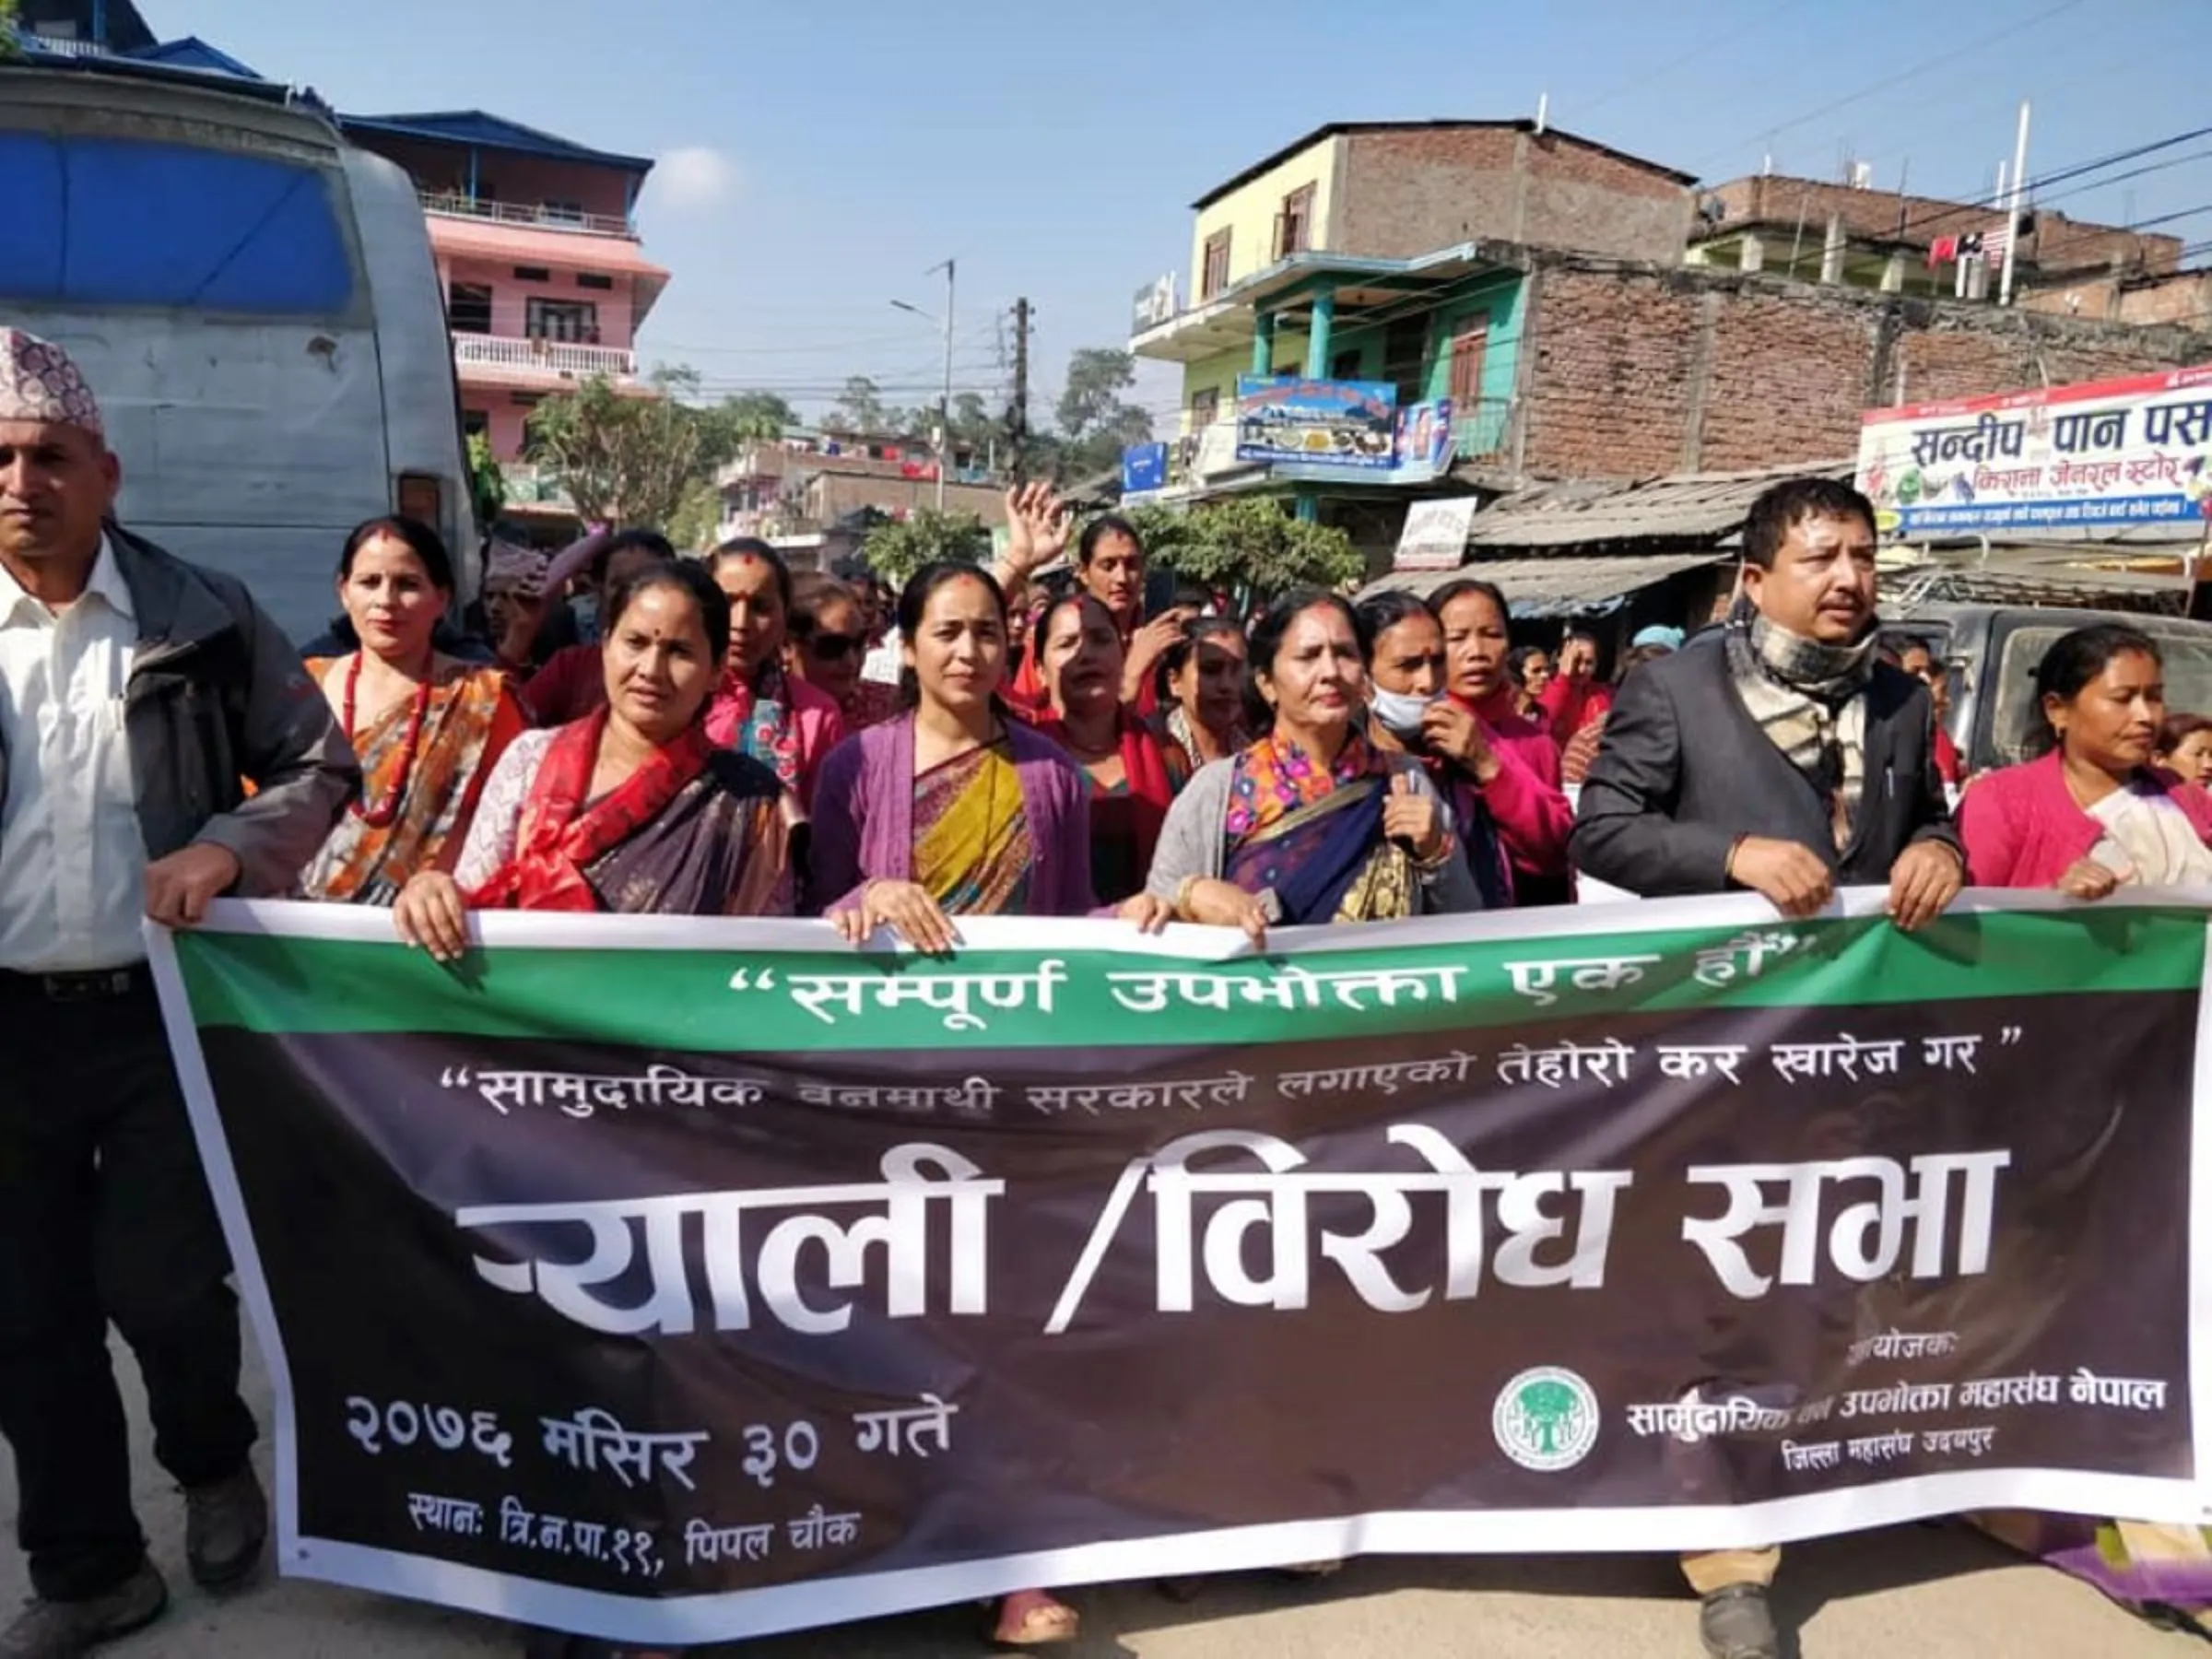 Community Forest users demonstrating against the tax imposed by the government in the Udaipur district, Nepal. December 17, 2019